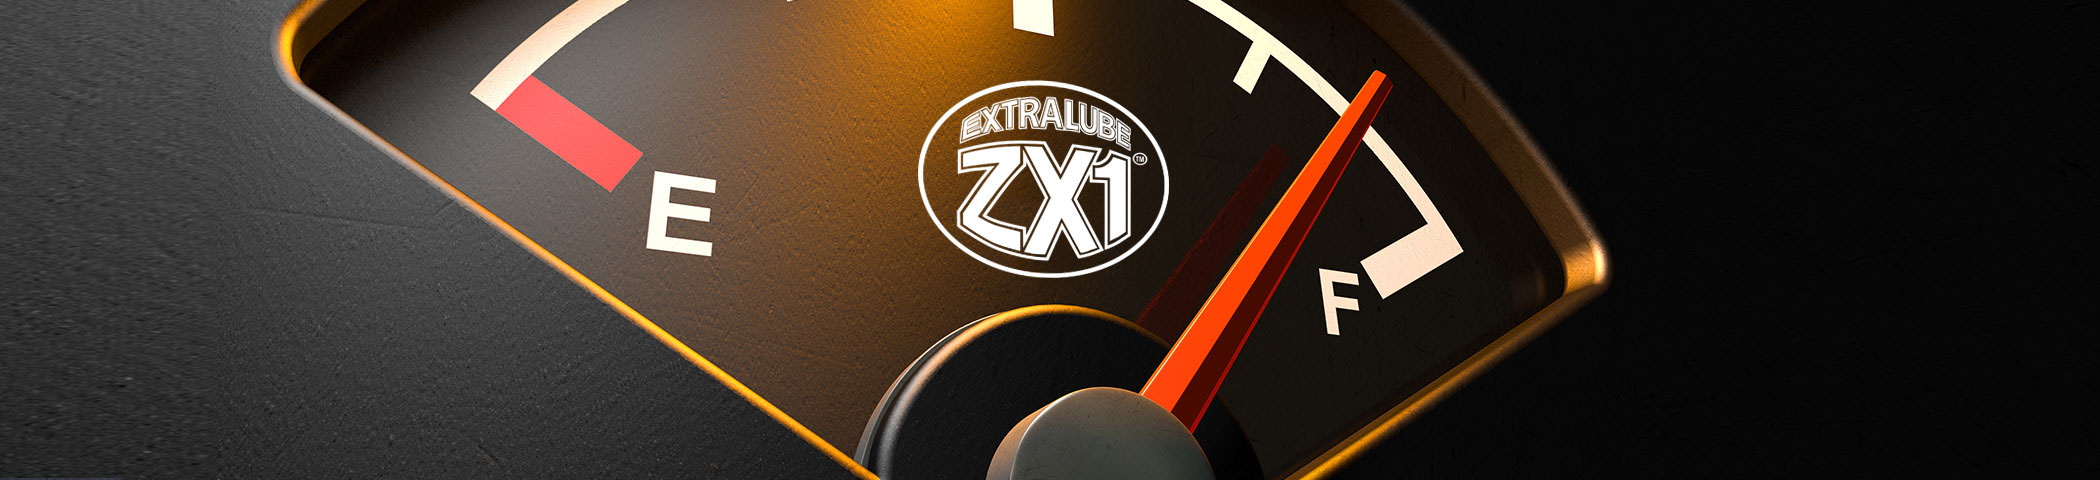 Welcome to EXTRALUBE ZX1 MICRO OIL METAL TREATMENT